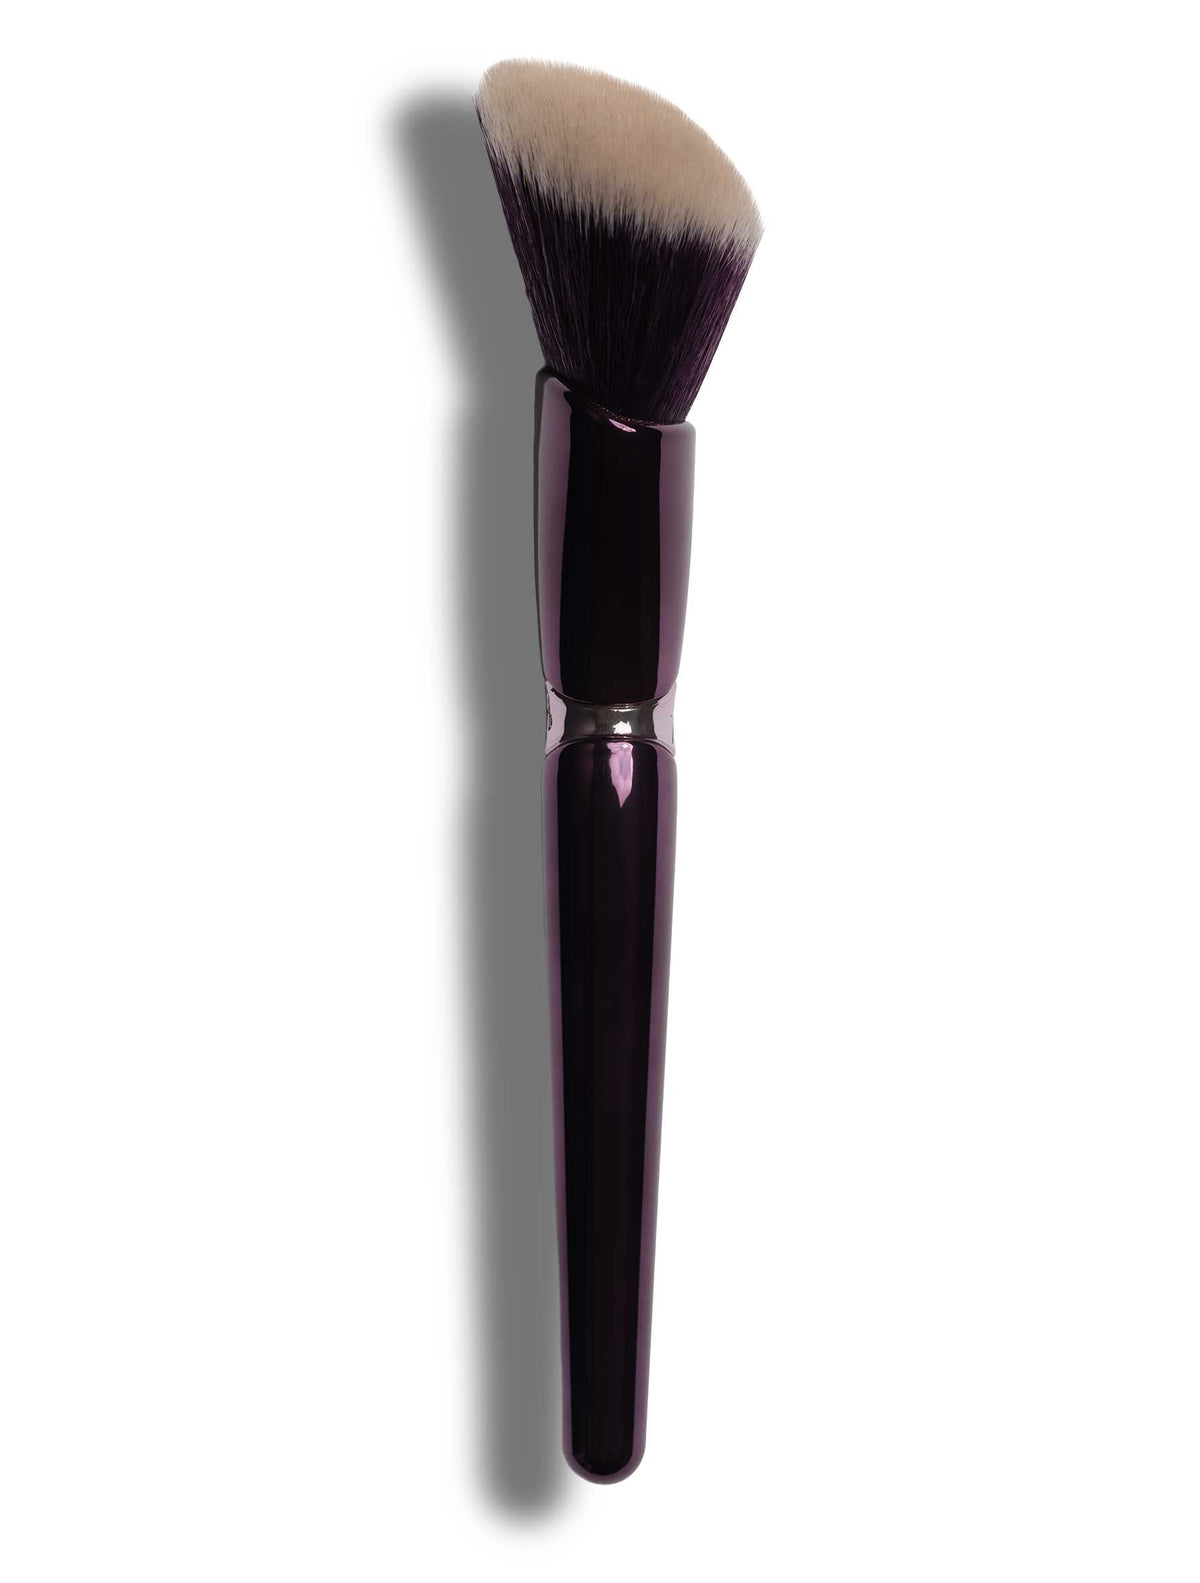 Silicone makeup brush cleaner – My Beautiful Fluff